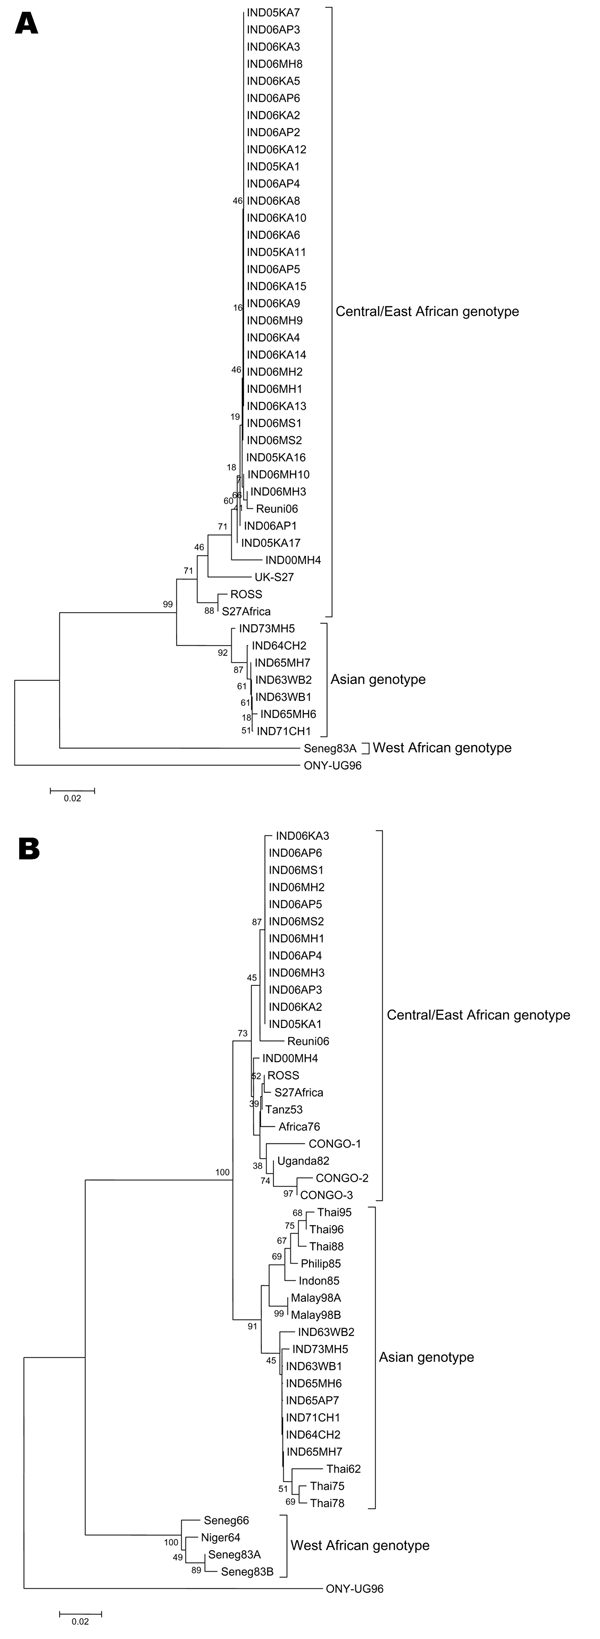 Phylogenic analyses of partial NS4 (456 nt, panel A) and E1 (294 nt, panel B). Refer to Table 1 for the details of the isolates sequenced during this study. Percentage bootstrap support is indicated by the values at each node. The following sequences were obtained from GenBank database: E1, ROSS (AF490259); S27Africa (NC-004162); Tanz53 (AF192905); Africa76 (AF192903); CONGO1 (AY549583); CONGO2 (AY549581); CONGO3 (AY549579); Uganda82 (AF192907); Thai95 (AF192897); Thai96 (AF192900); Thai88 (AF19